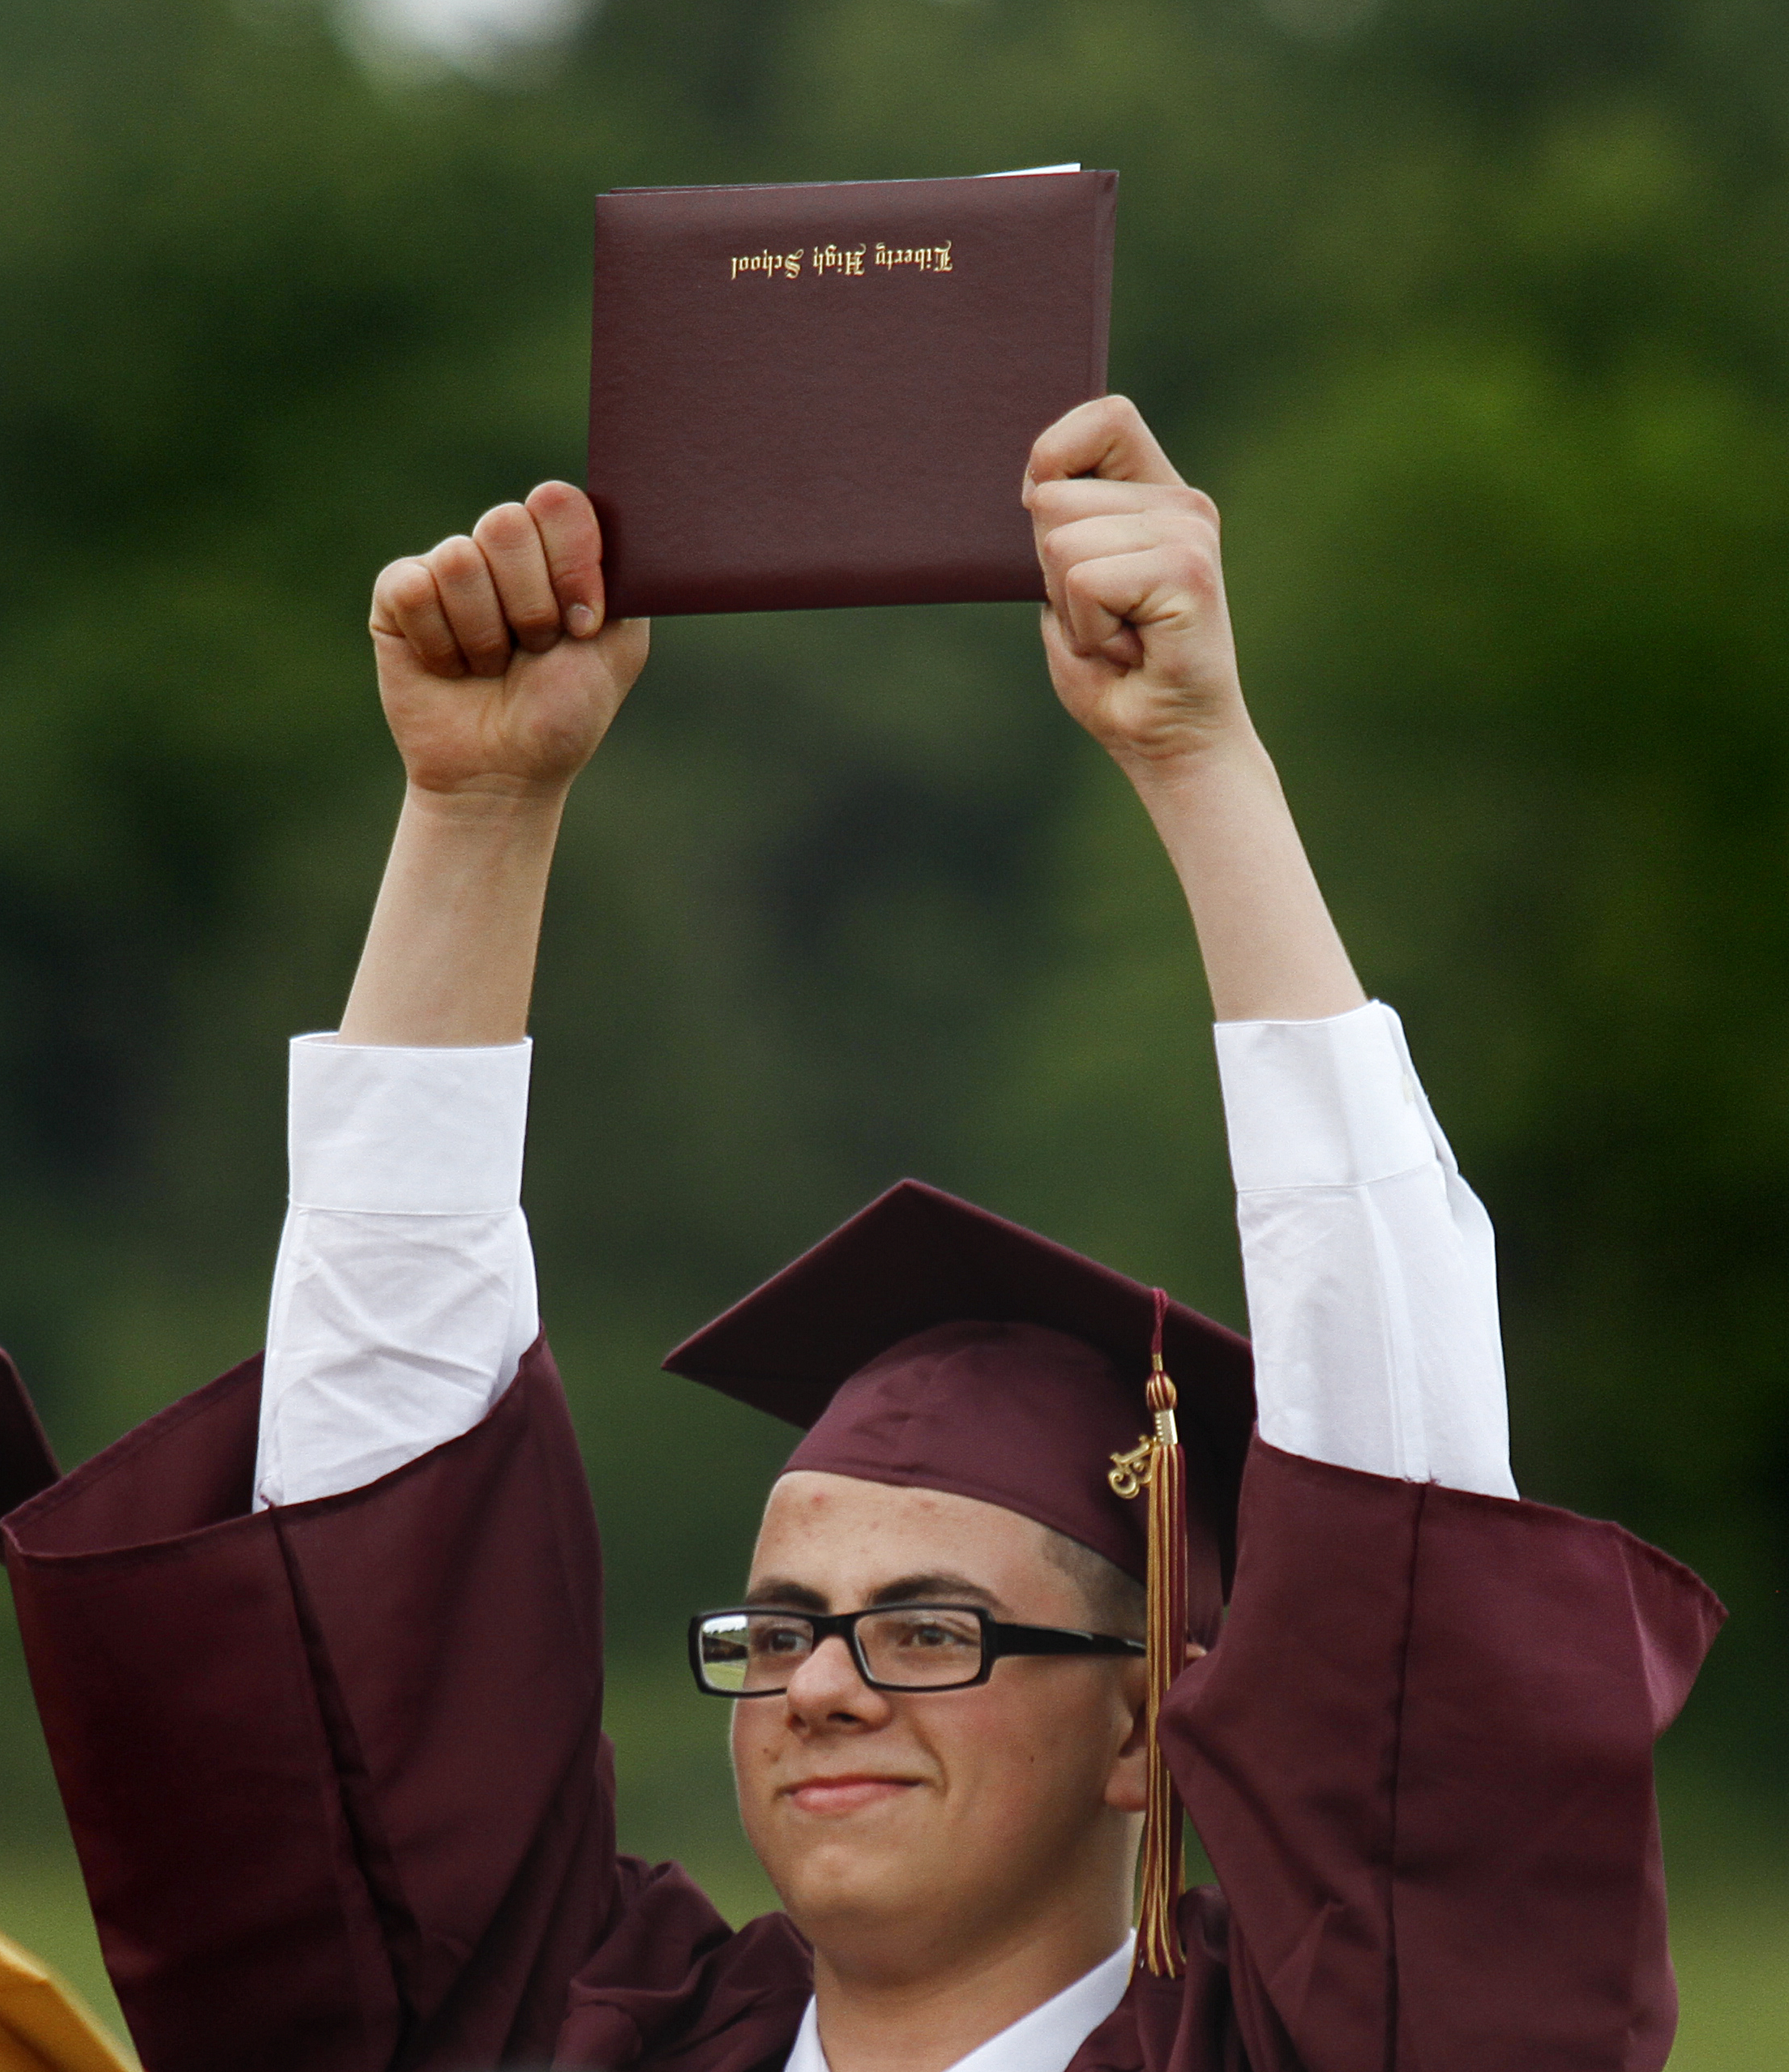 MADELYN P. HASTINGS | THE VINDICATOR

Abdallah Yusuf reacts after receiving his diploma during Liberty High School's commencement.